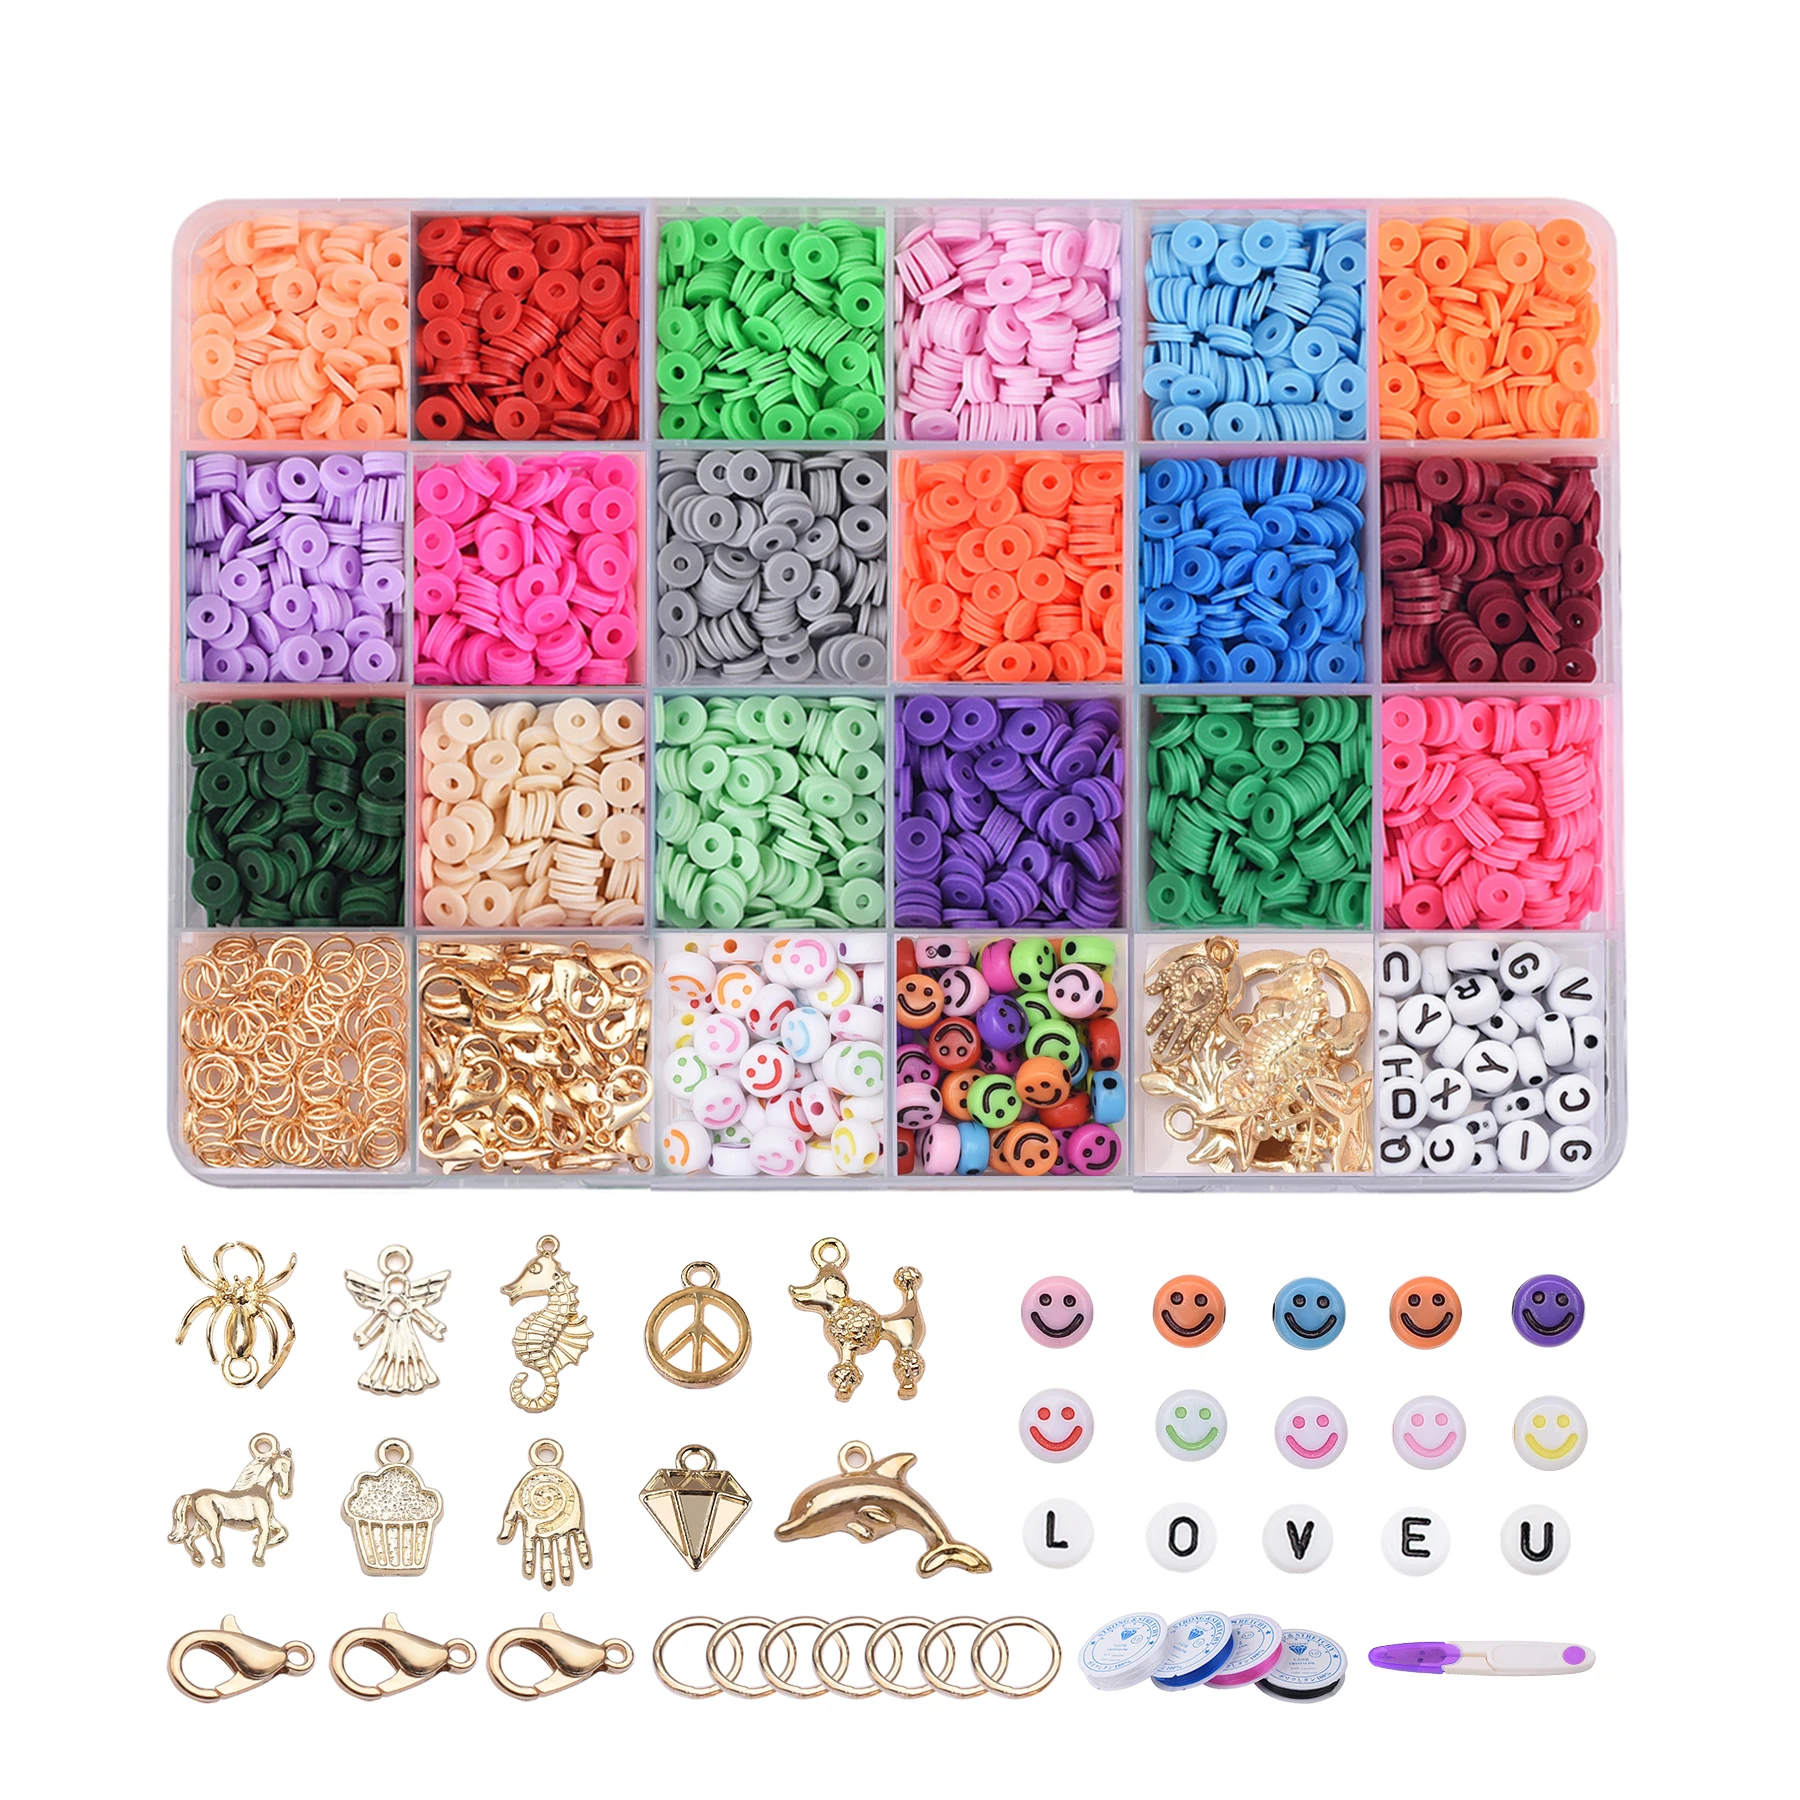 

Flat Clay Beads with Golden Charm Alphabet Lettersbeads for Jewelry Making, Round Clay Colorful Heishi Beads for DIY Bracelets